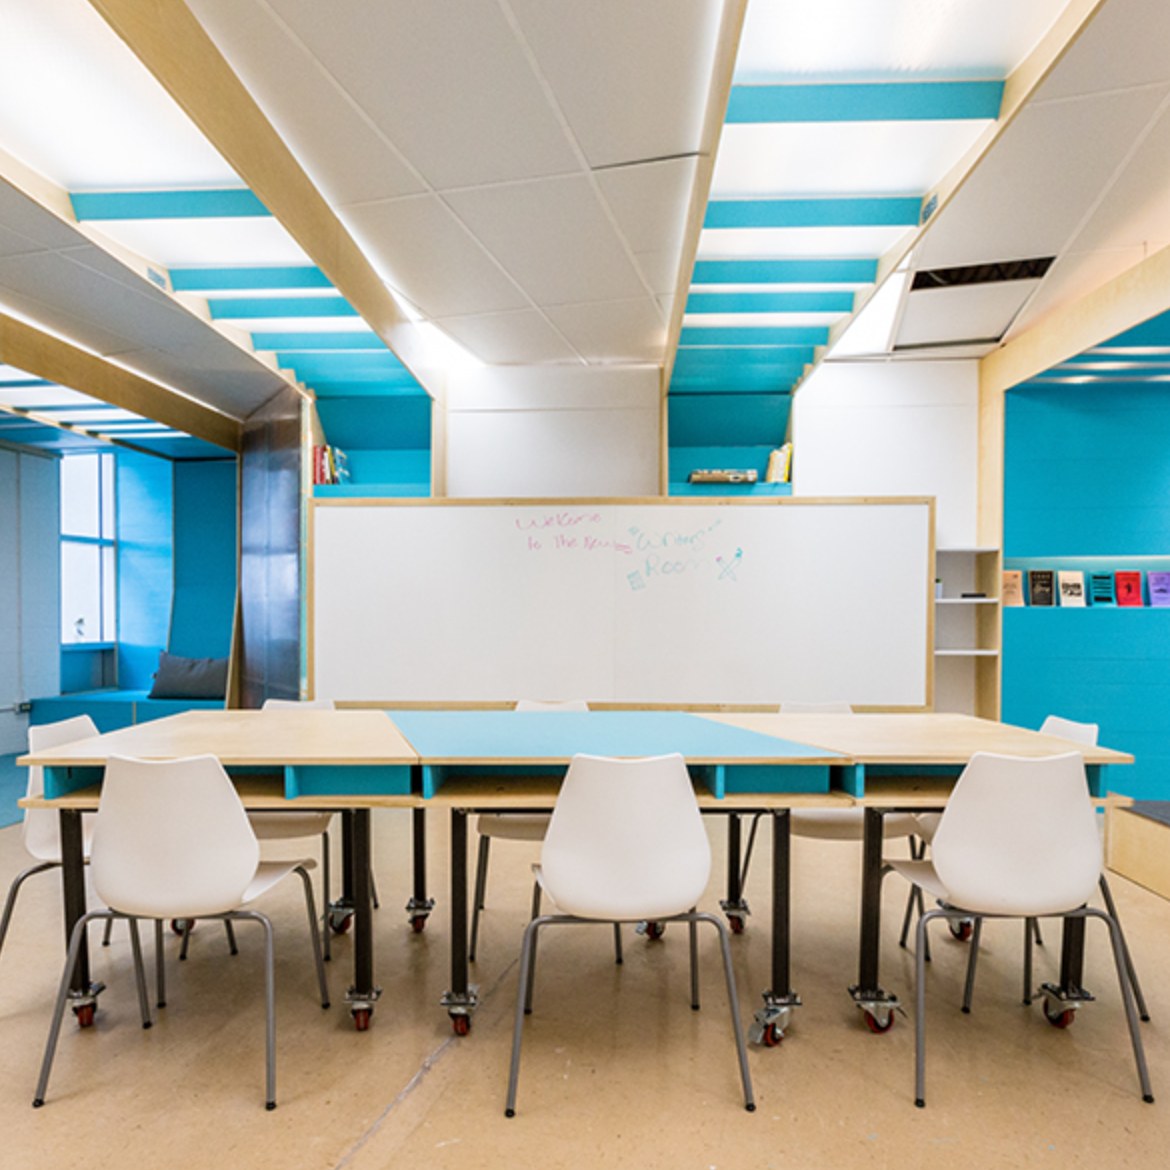 Image of a class room with a white board and white chairs